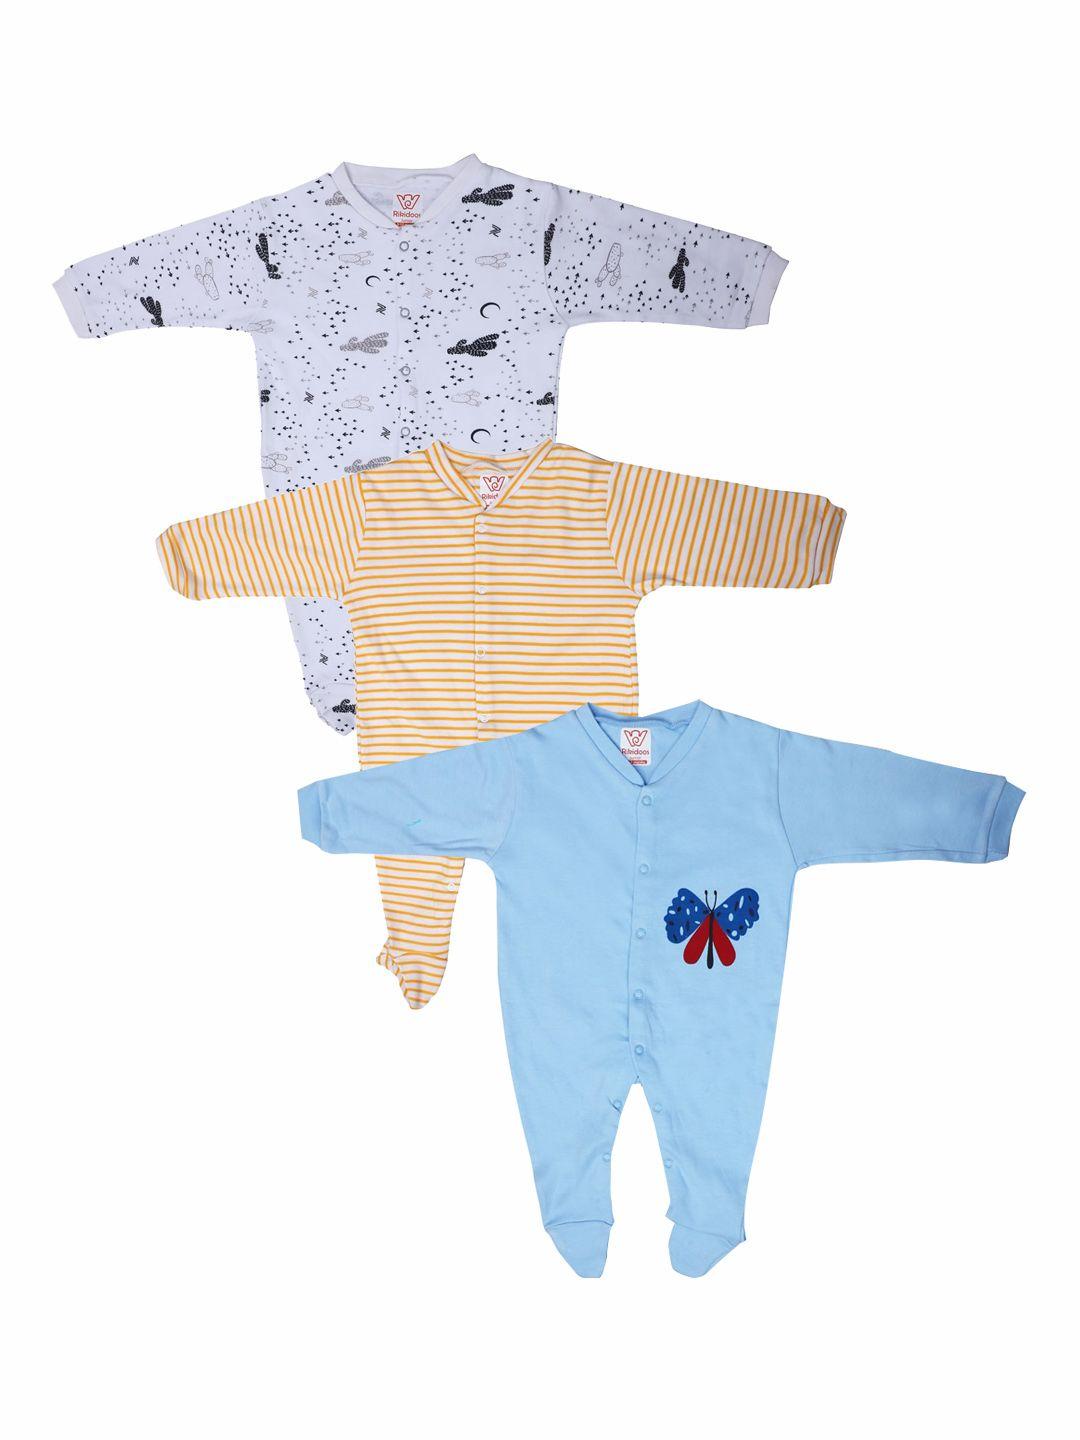 rikidoos pack of 3 white & blue printed cotton rompers